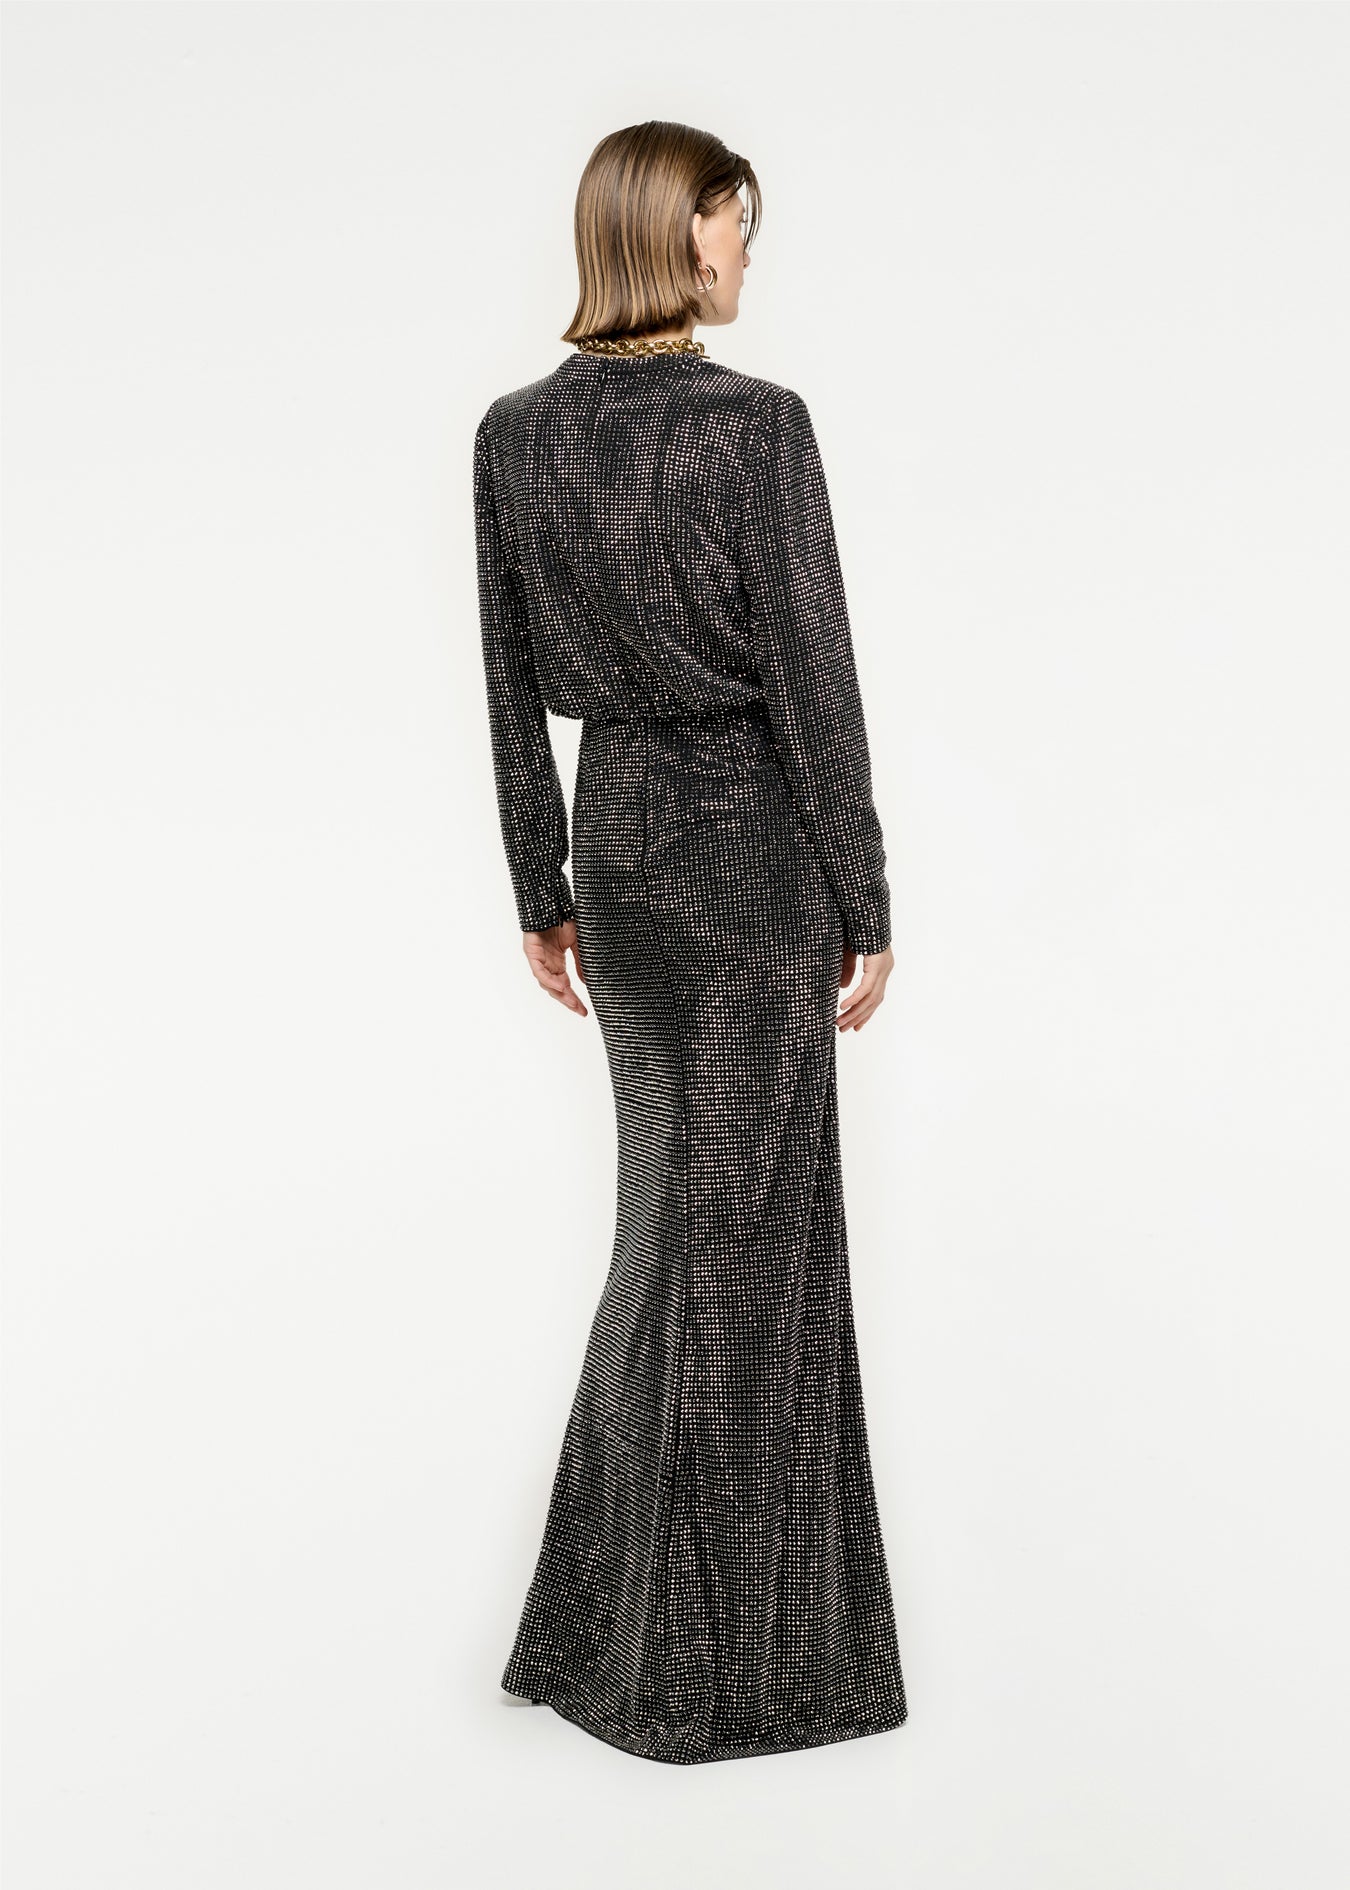 The back of a woman wearing the Long Sleeve Diamante Maxi Dress in Black